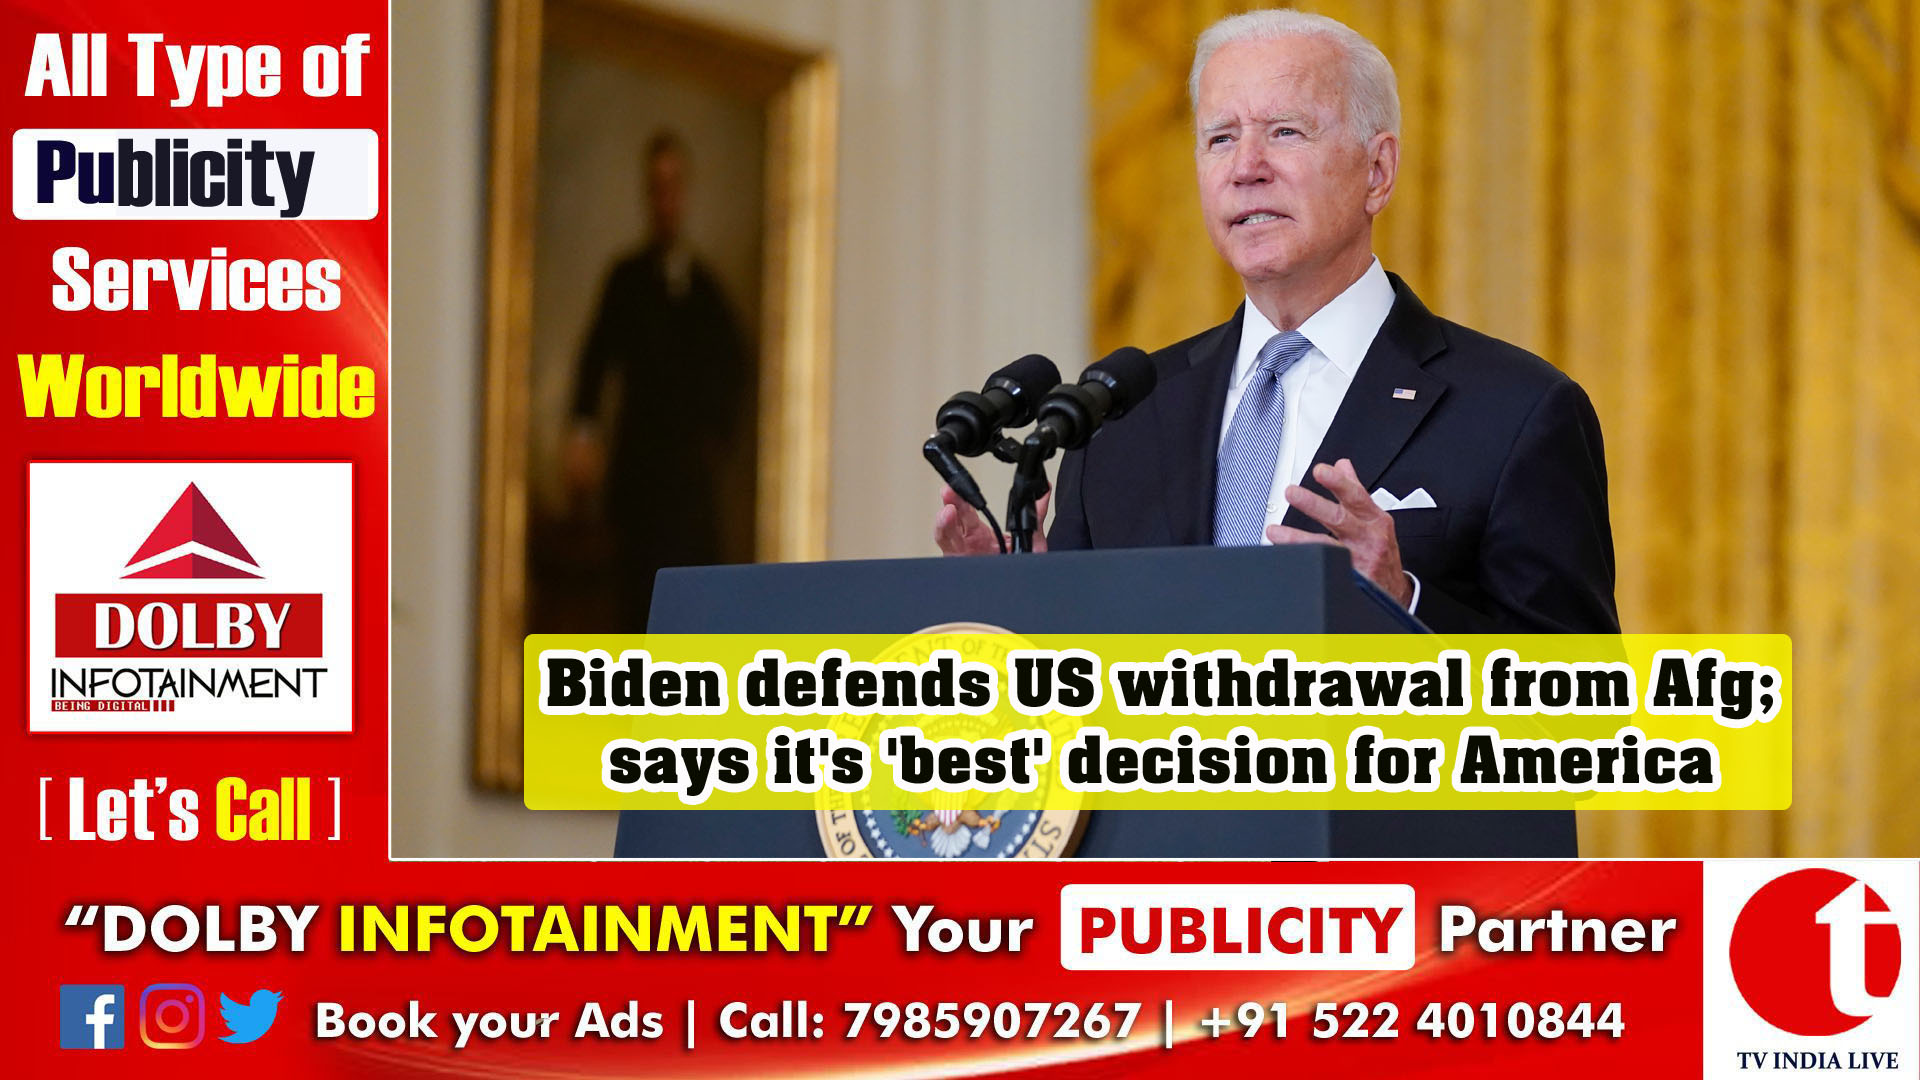 Biden defends US withdrawal from Afghanistan; says it's 'best' decision for America